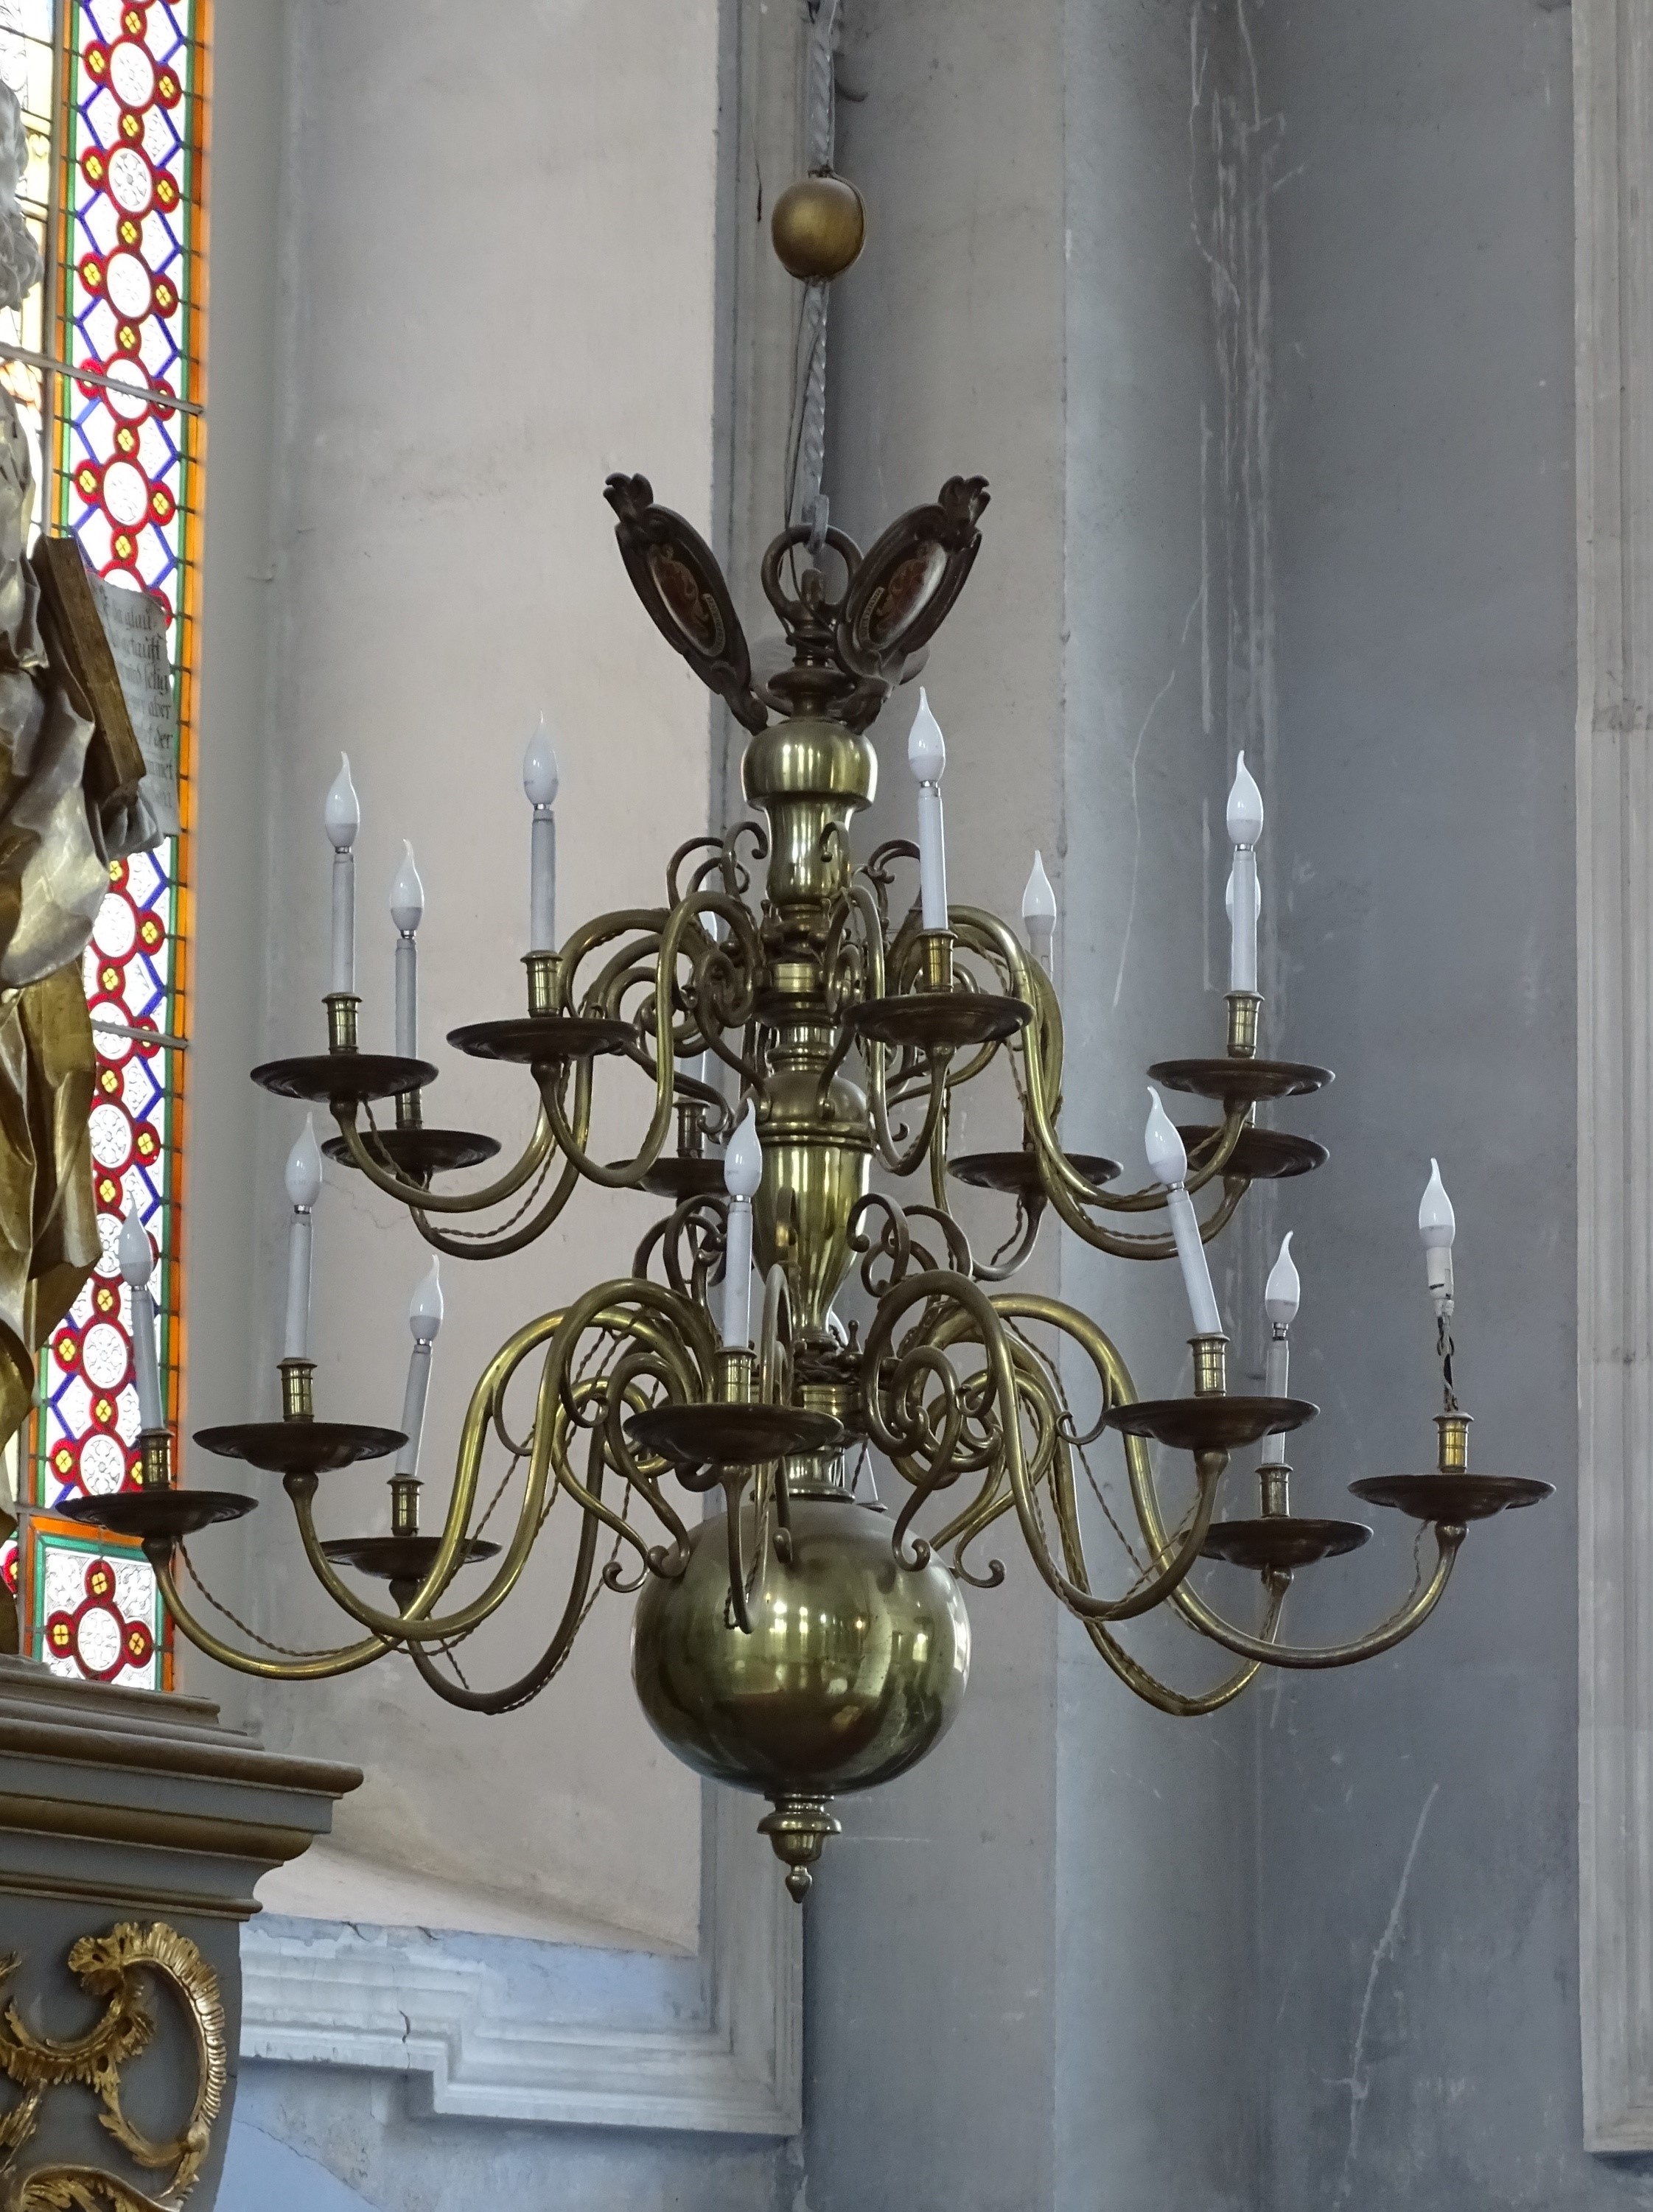 Chandelier, middle of 17th c., Liepāja Holy Trinity Evangelical Lutheran Cathedral. Photo by Alantė Valtaitė-Gagač, 2021